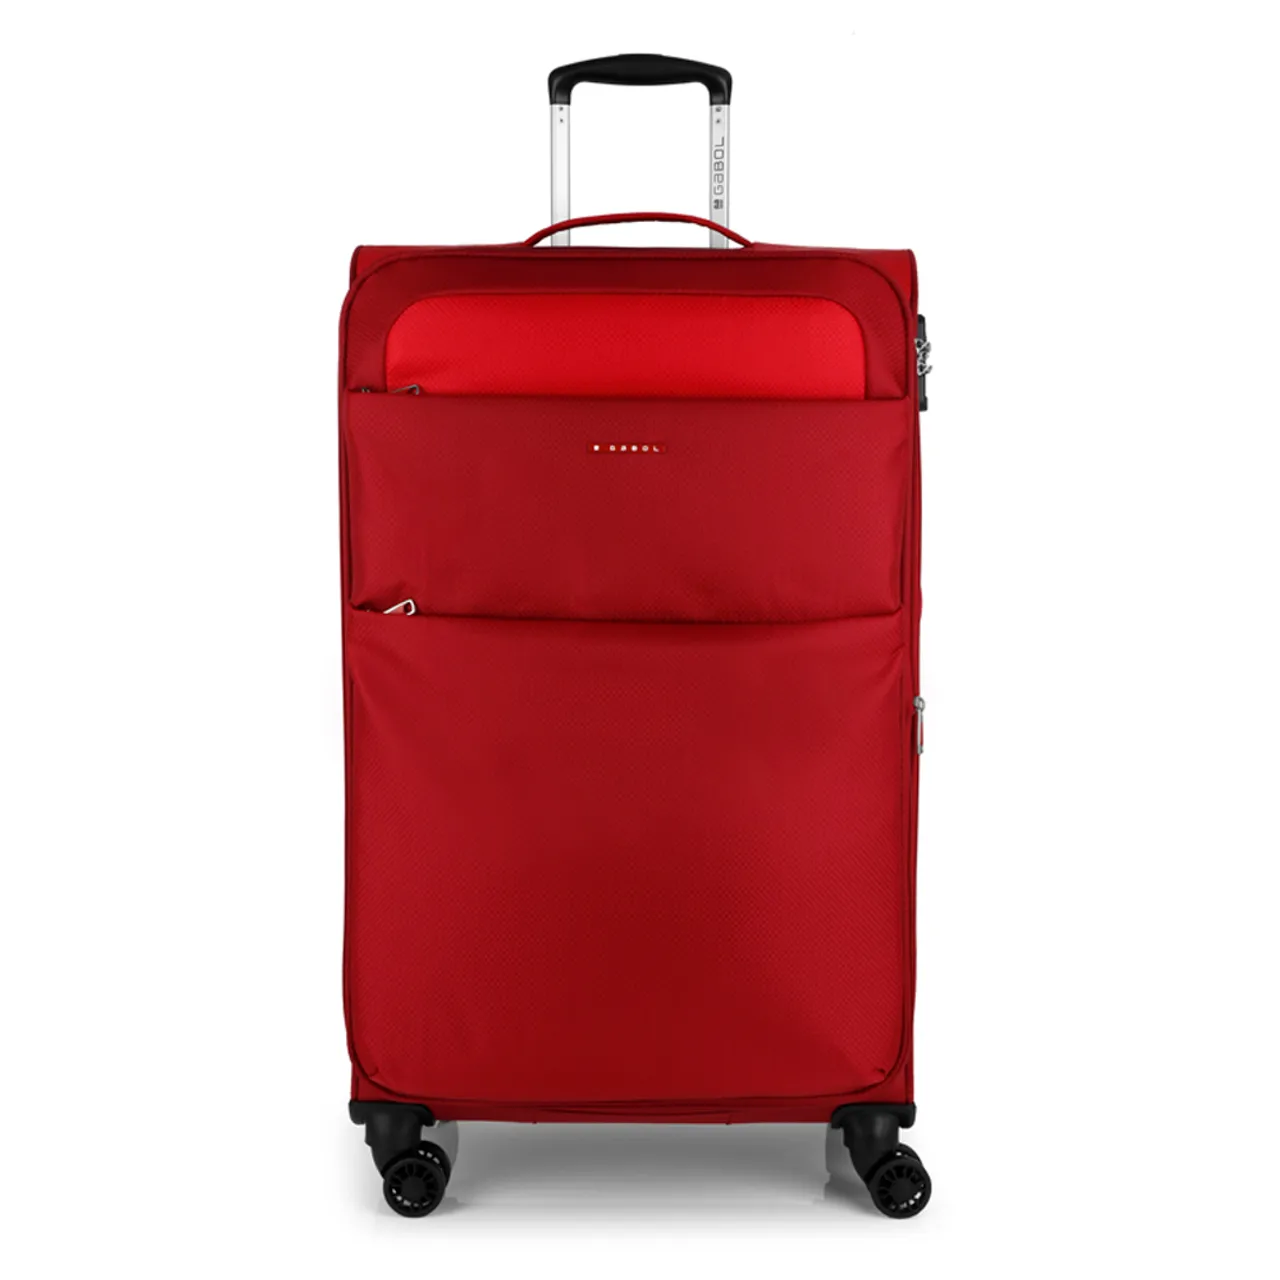 Gabol Cloud Large Trolley 79 Expandable Red